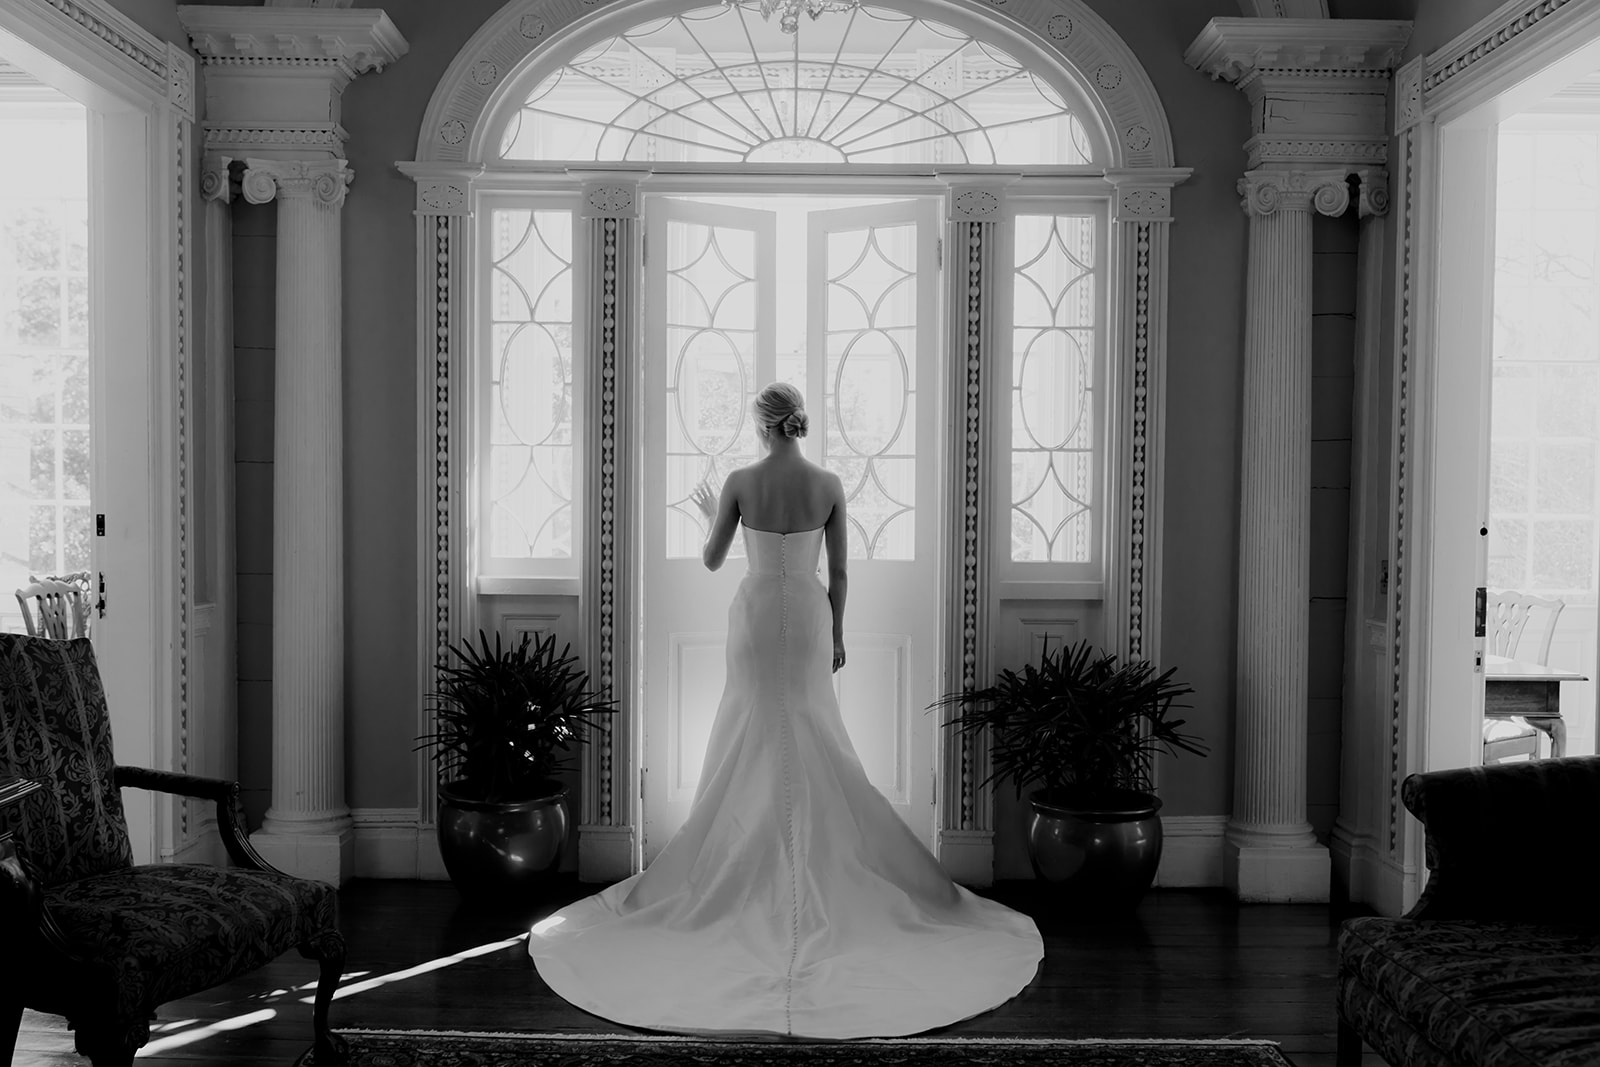 Black and white photo to highlight wedding dress and bride